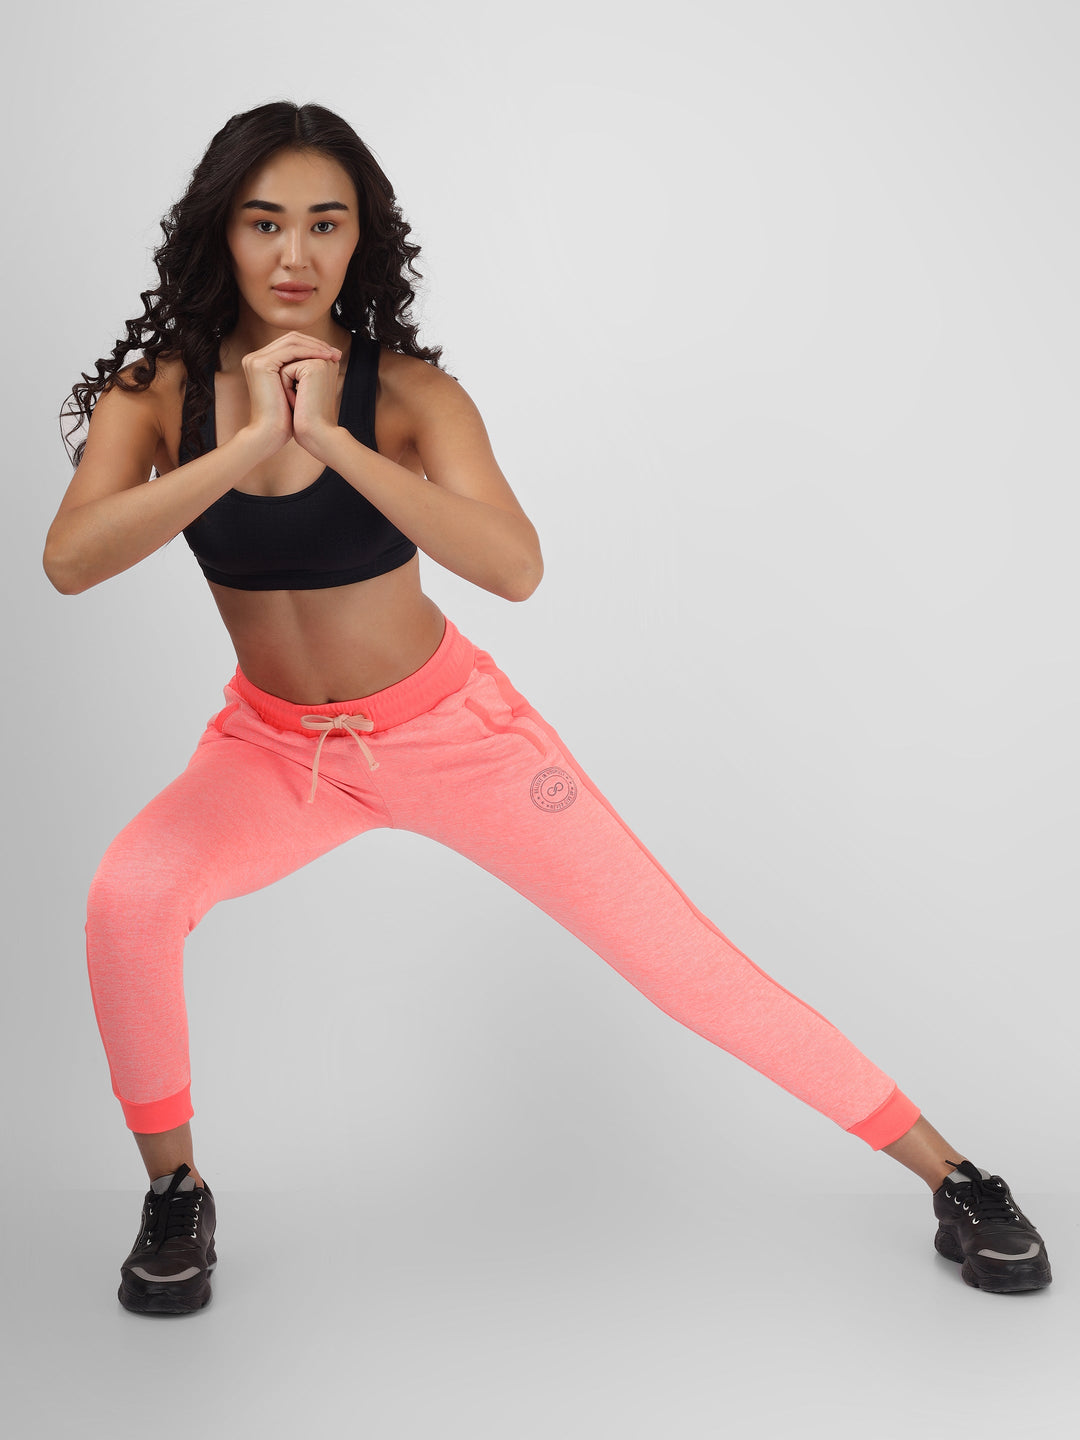 Neon Pink Marl All Day Joggers